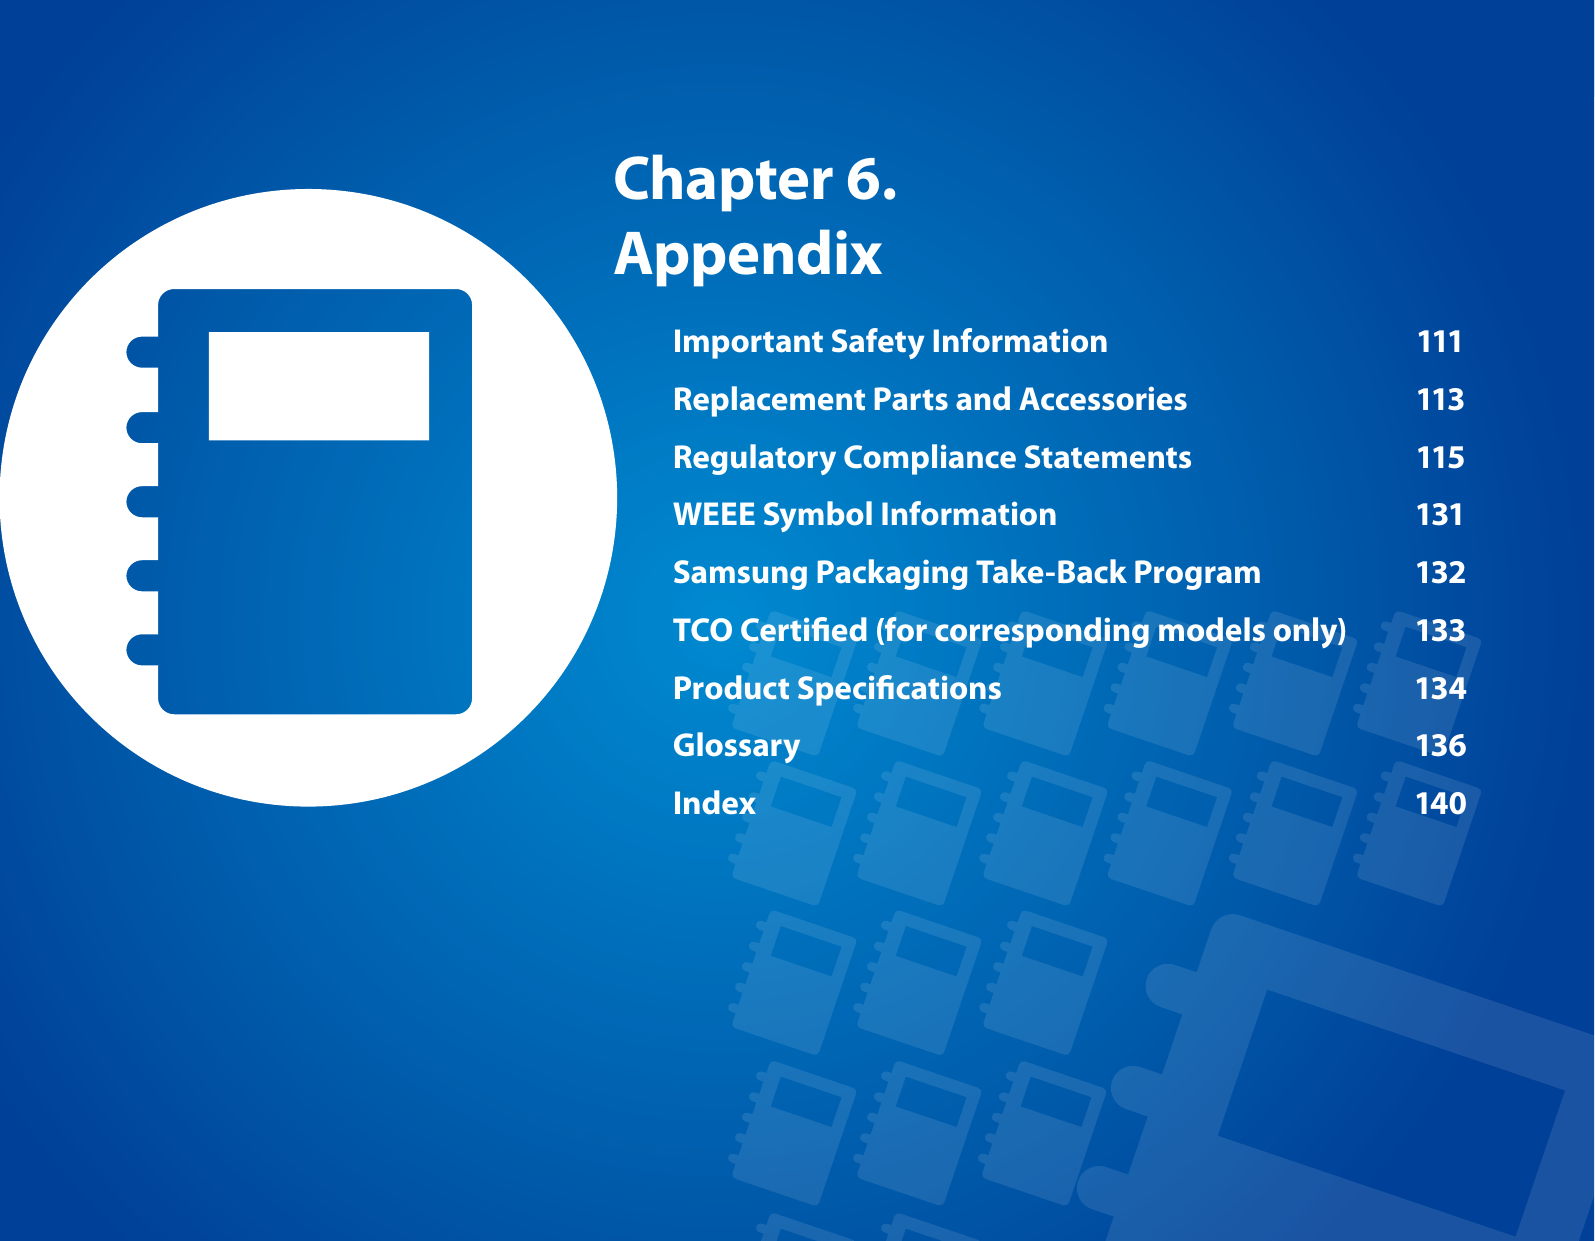 Chapter 6. AppendixImportant Safety Information  111Replacement Parts and Accessories  113Regulatory Compliance Statements  115WEEE Symbol Information  131Samsung Packaging Take-Back Program  132TCO Certied (for corresponding models only)  133Product Specications  134Glossary  136Index  140